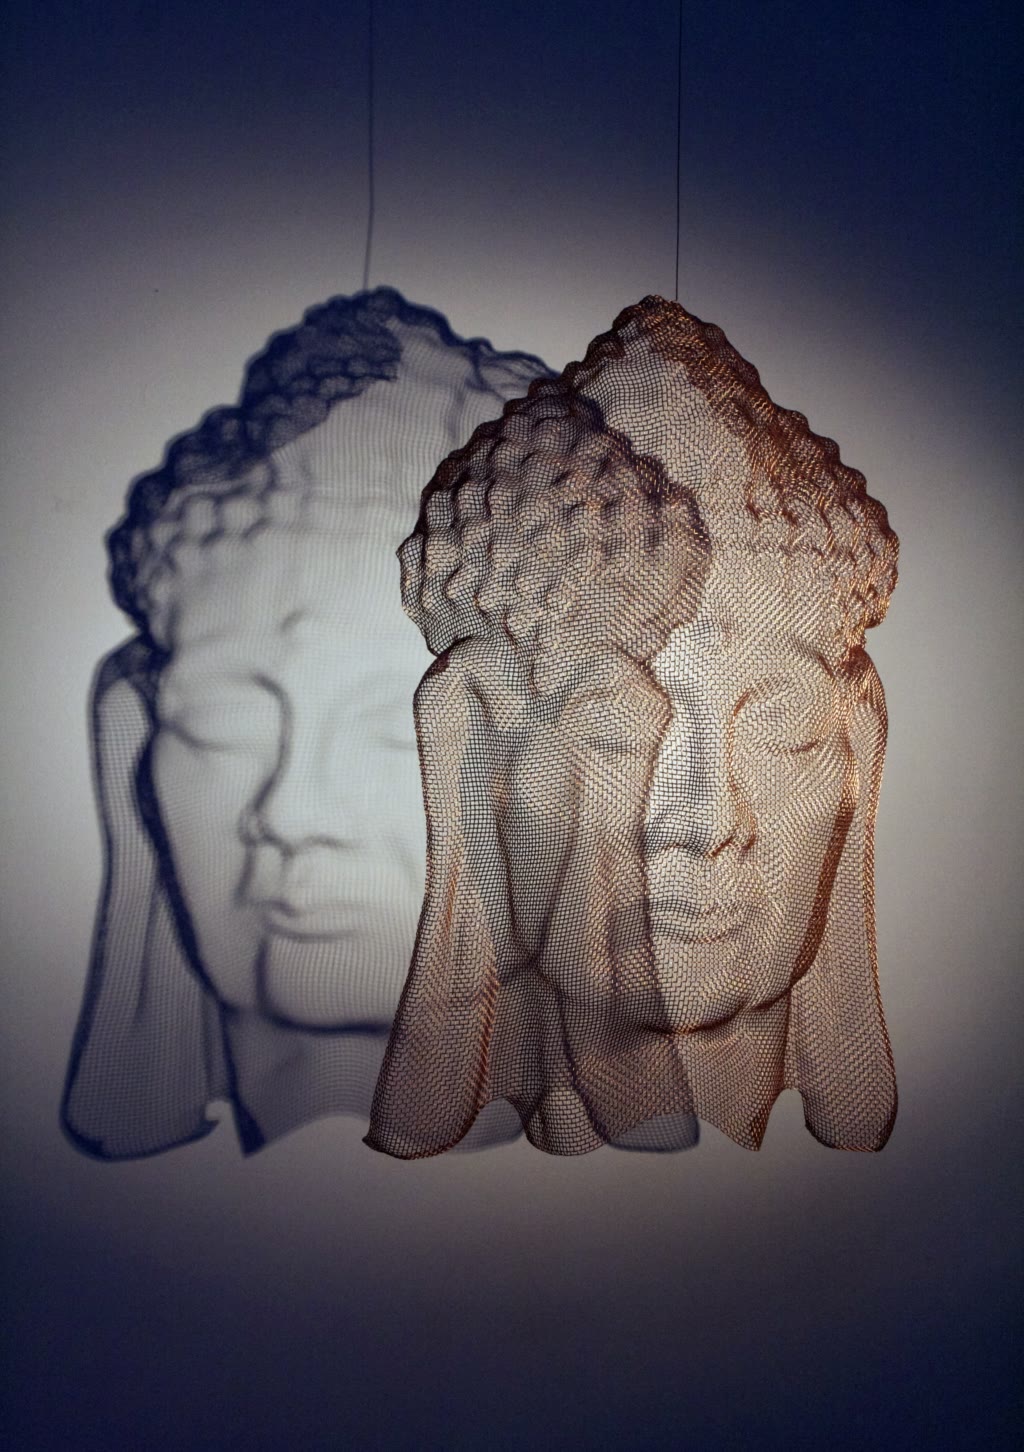 The face of a Buddha Figure made from Wire-Mesh